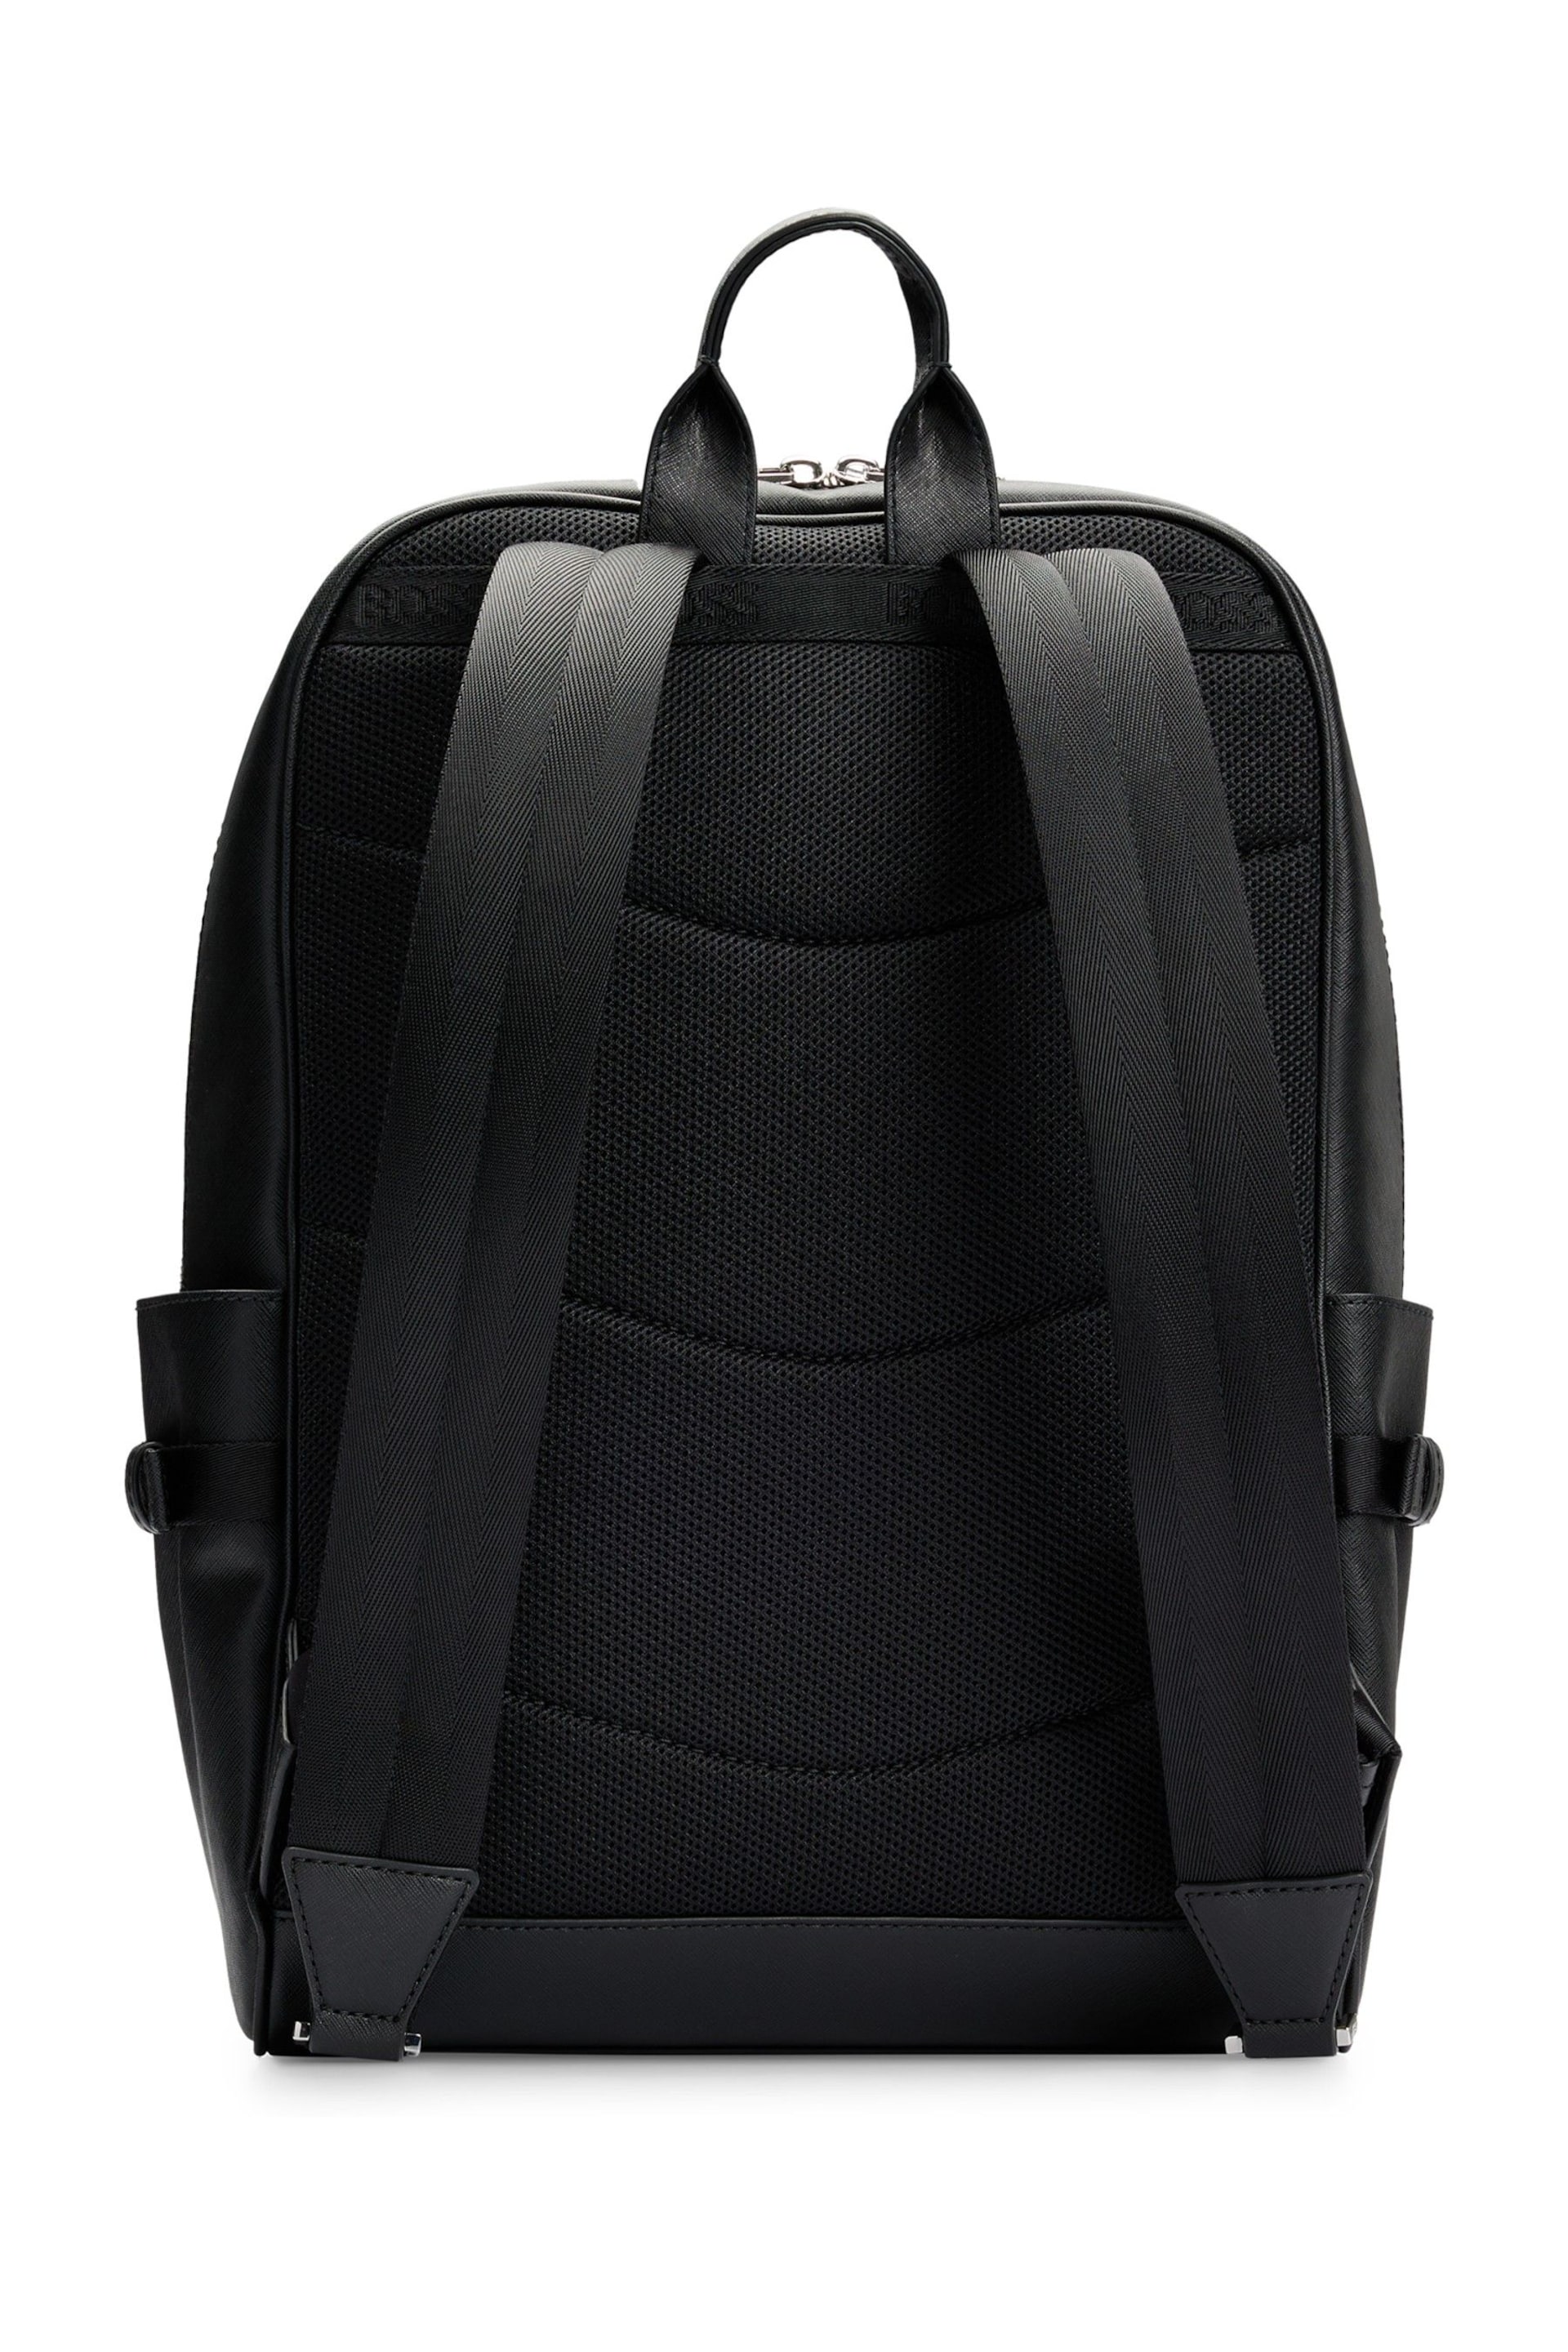 BOSS Black Leather Structured Backpack - Image 4 of 6